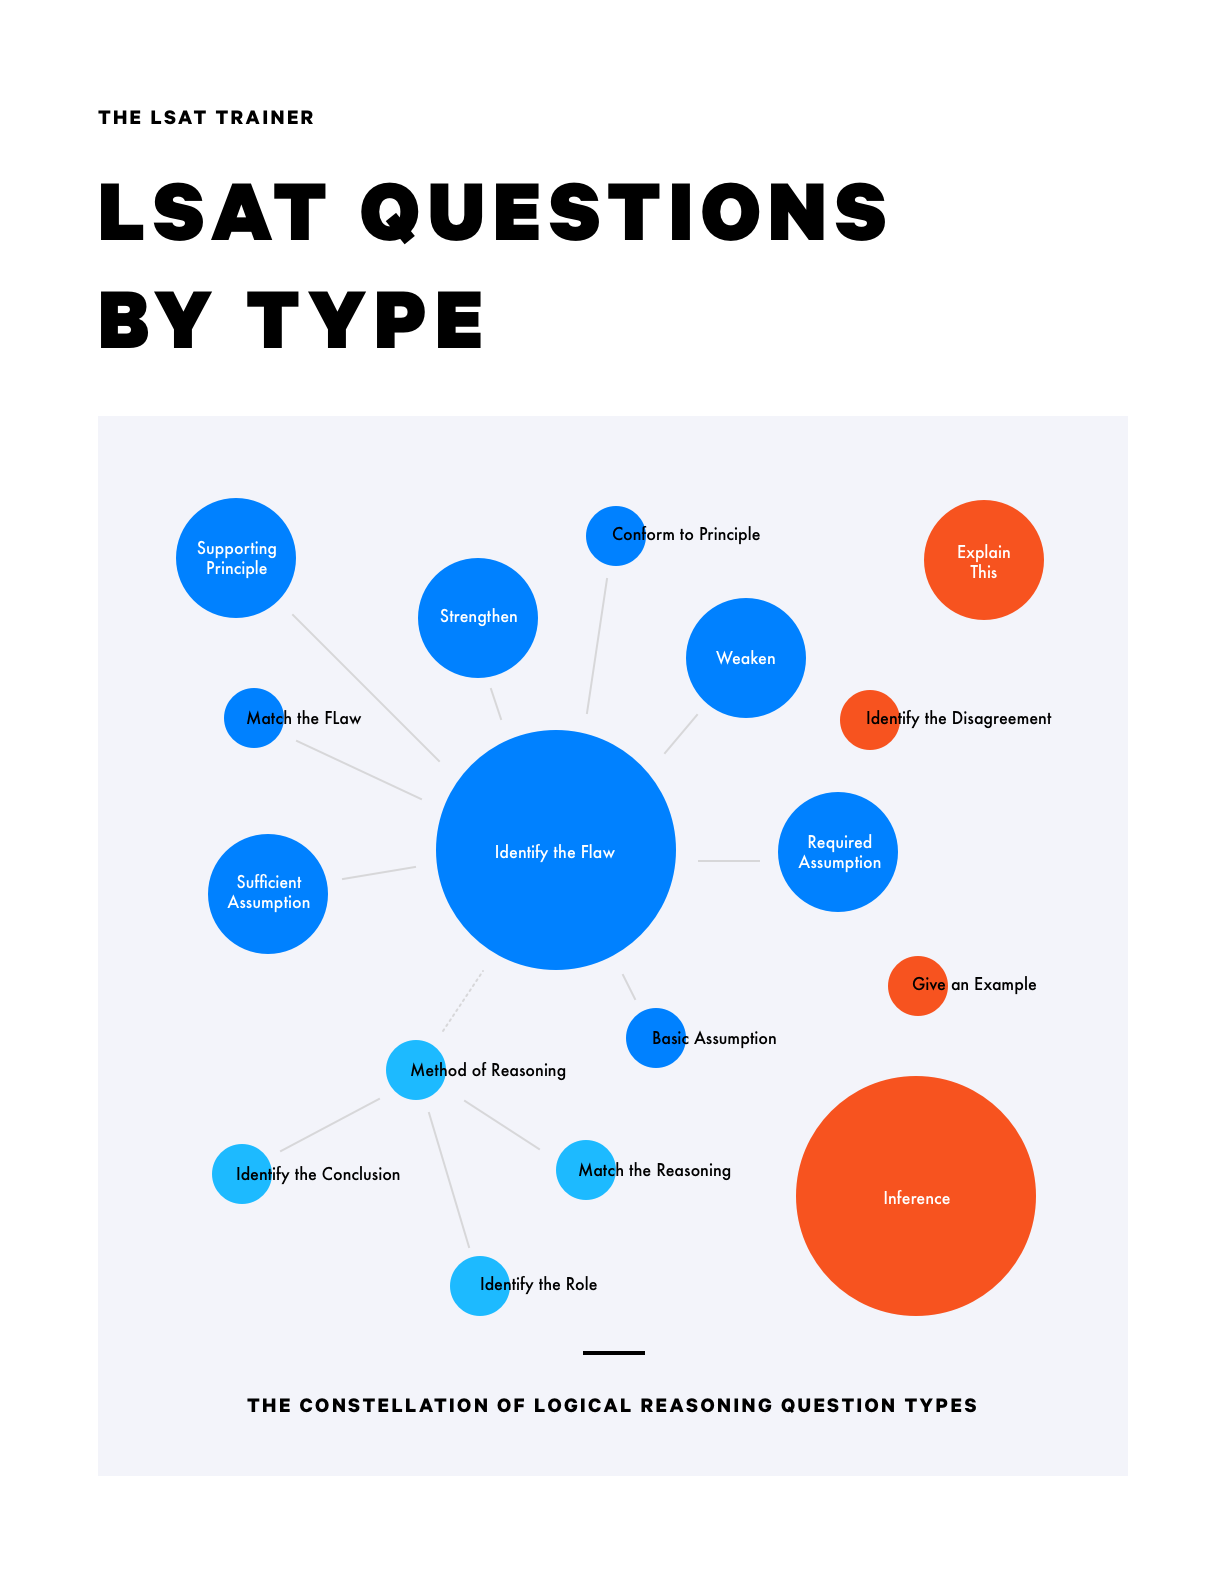 Questions by Type Tool